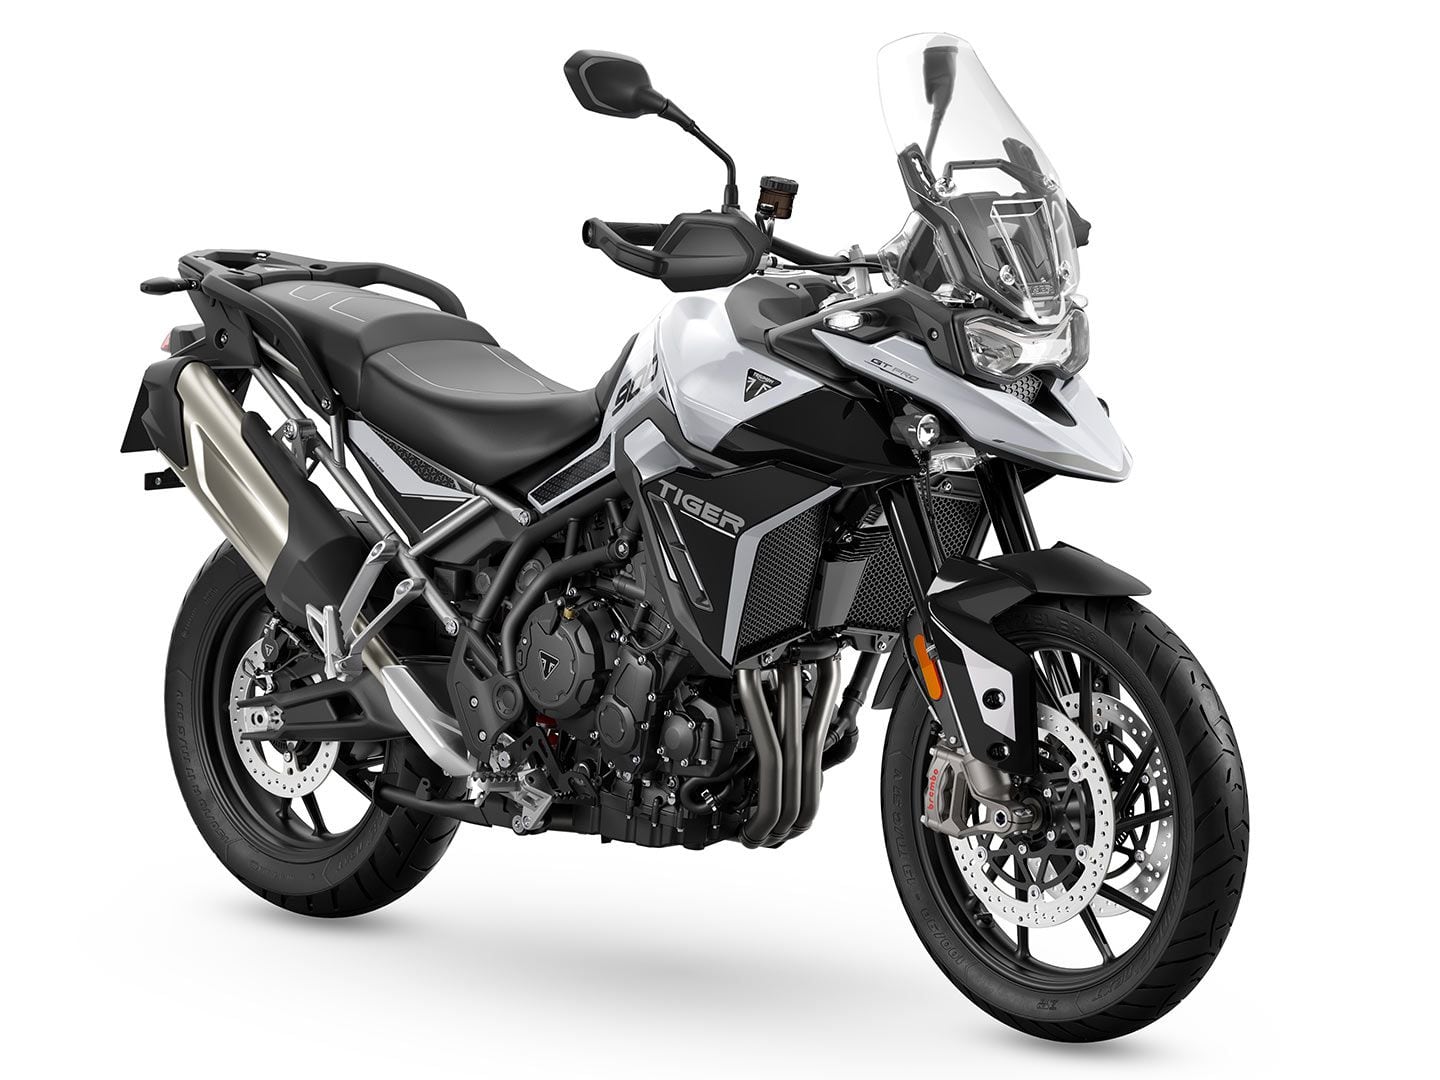 The Tiger 900 GT Pro ups the touring chops with electronically adjustable rear suspension.